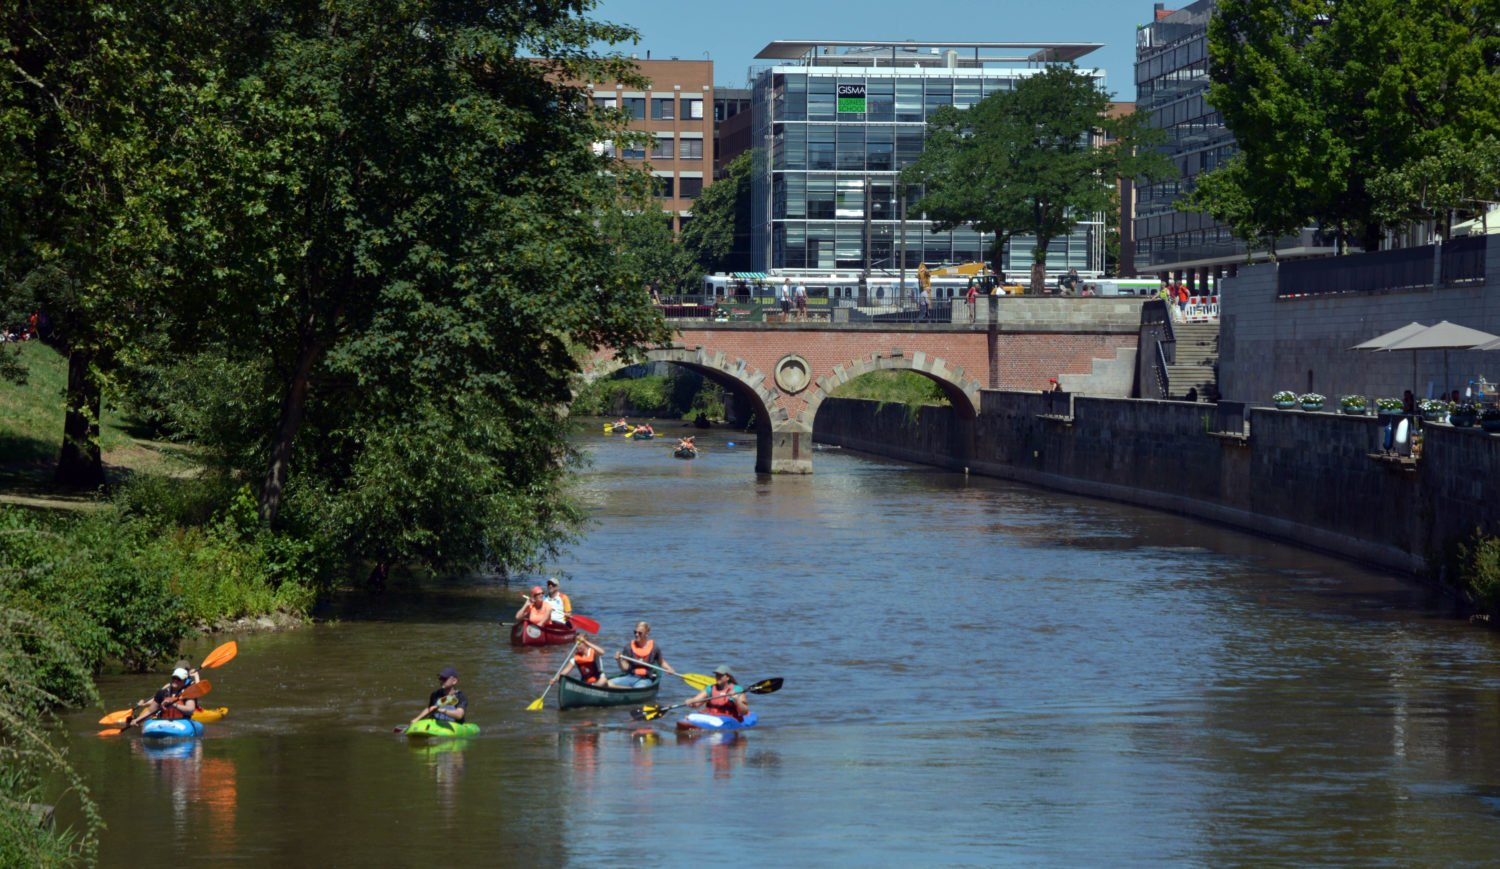 From the canoe you experience cities in a whole new way, here in Hanover © fra - stock.adobe.com